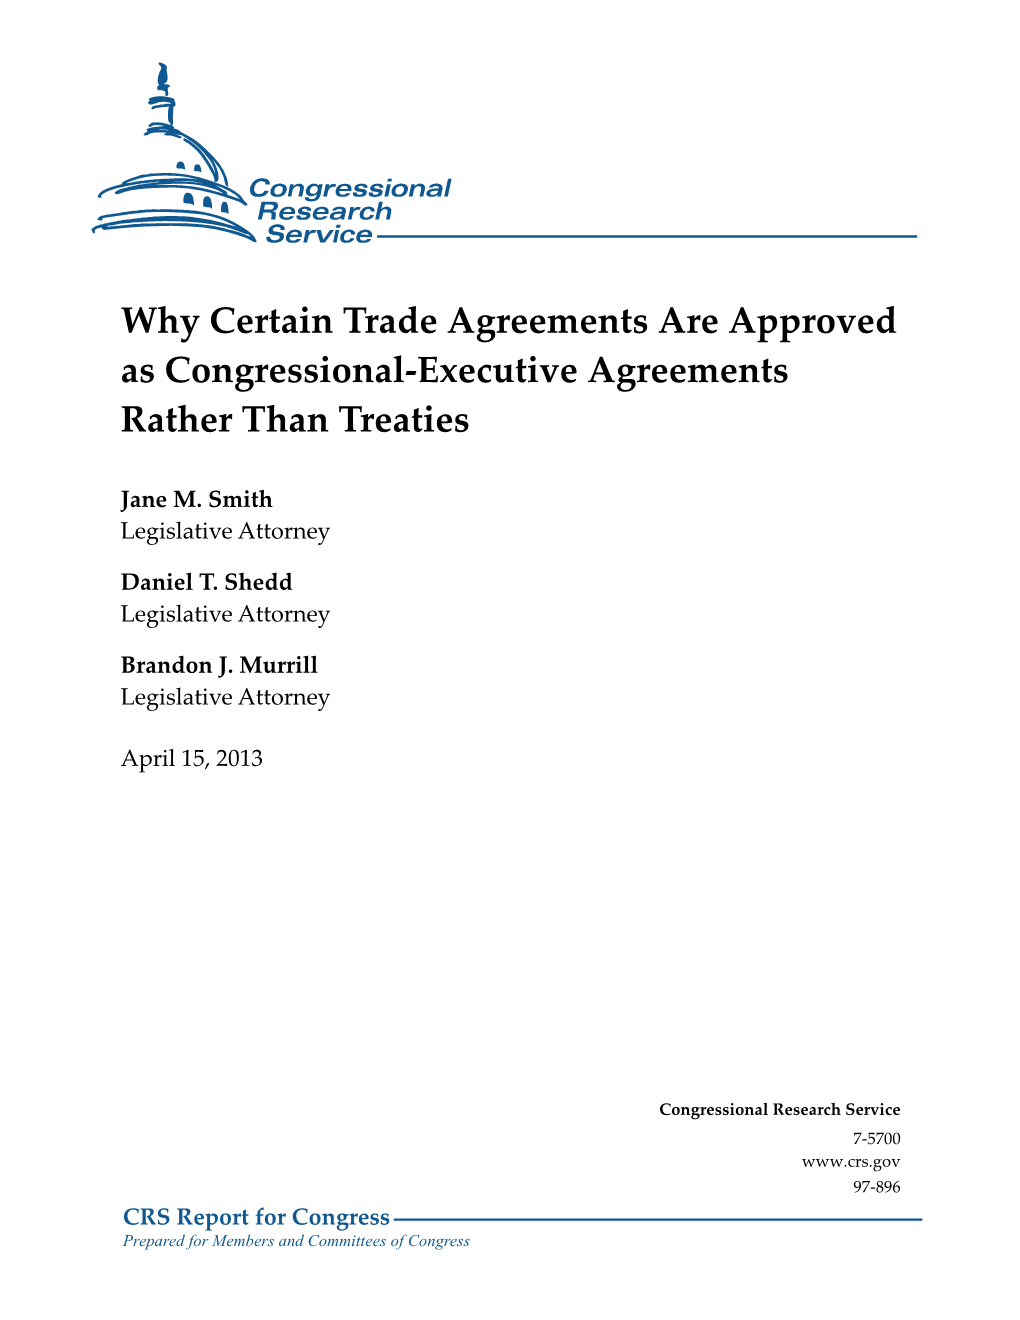 Why Certain Trade Agreements Are Approved As Congressional-Executive Agreements Rather Than Treaties